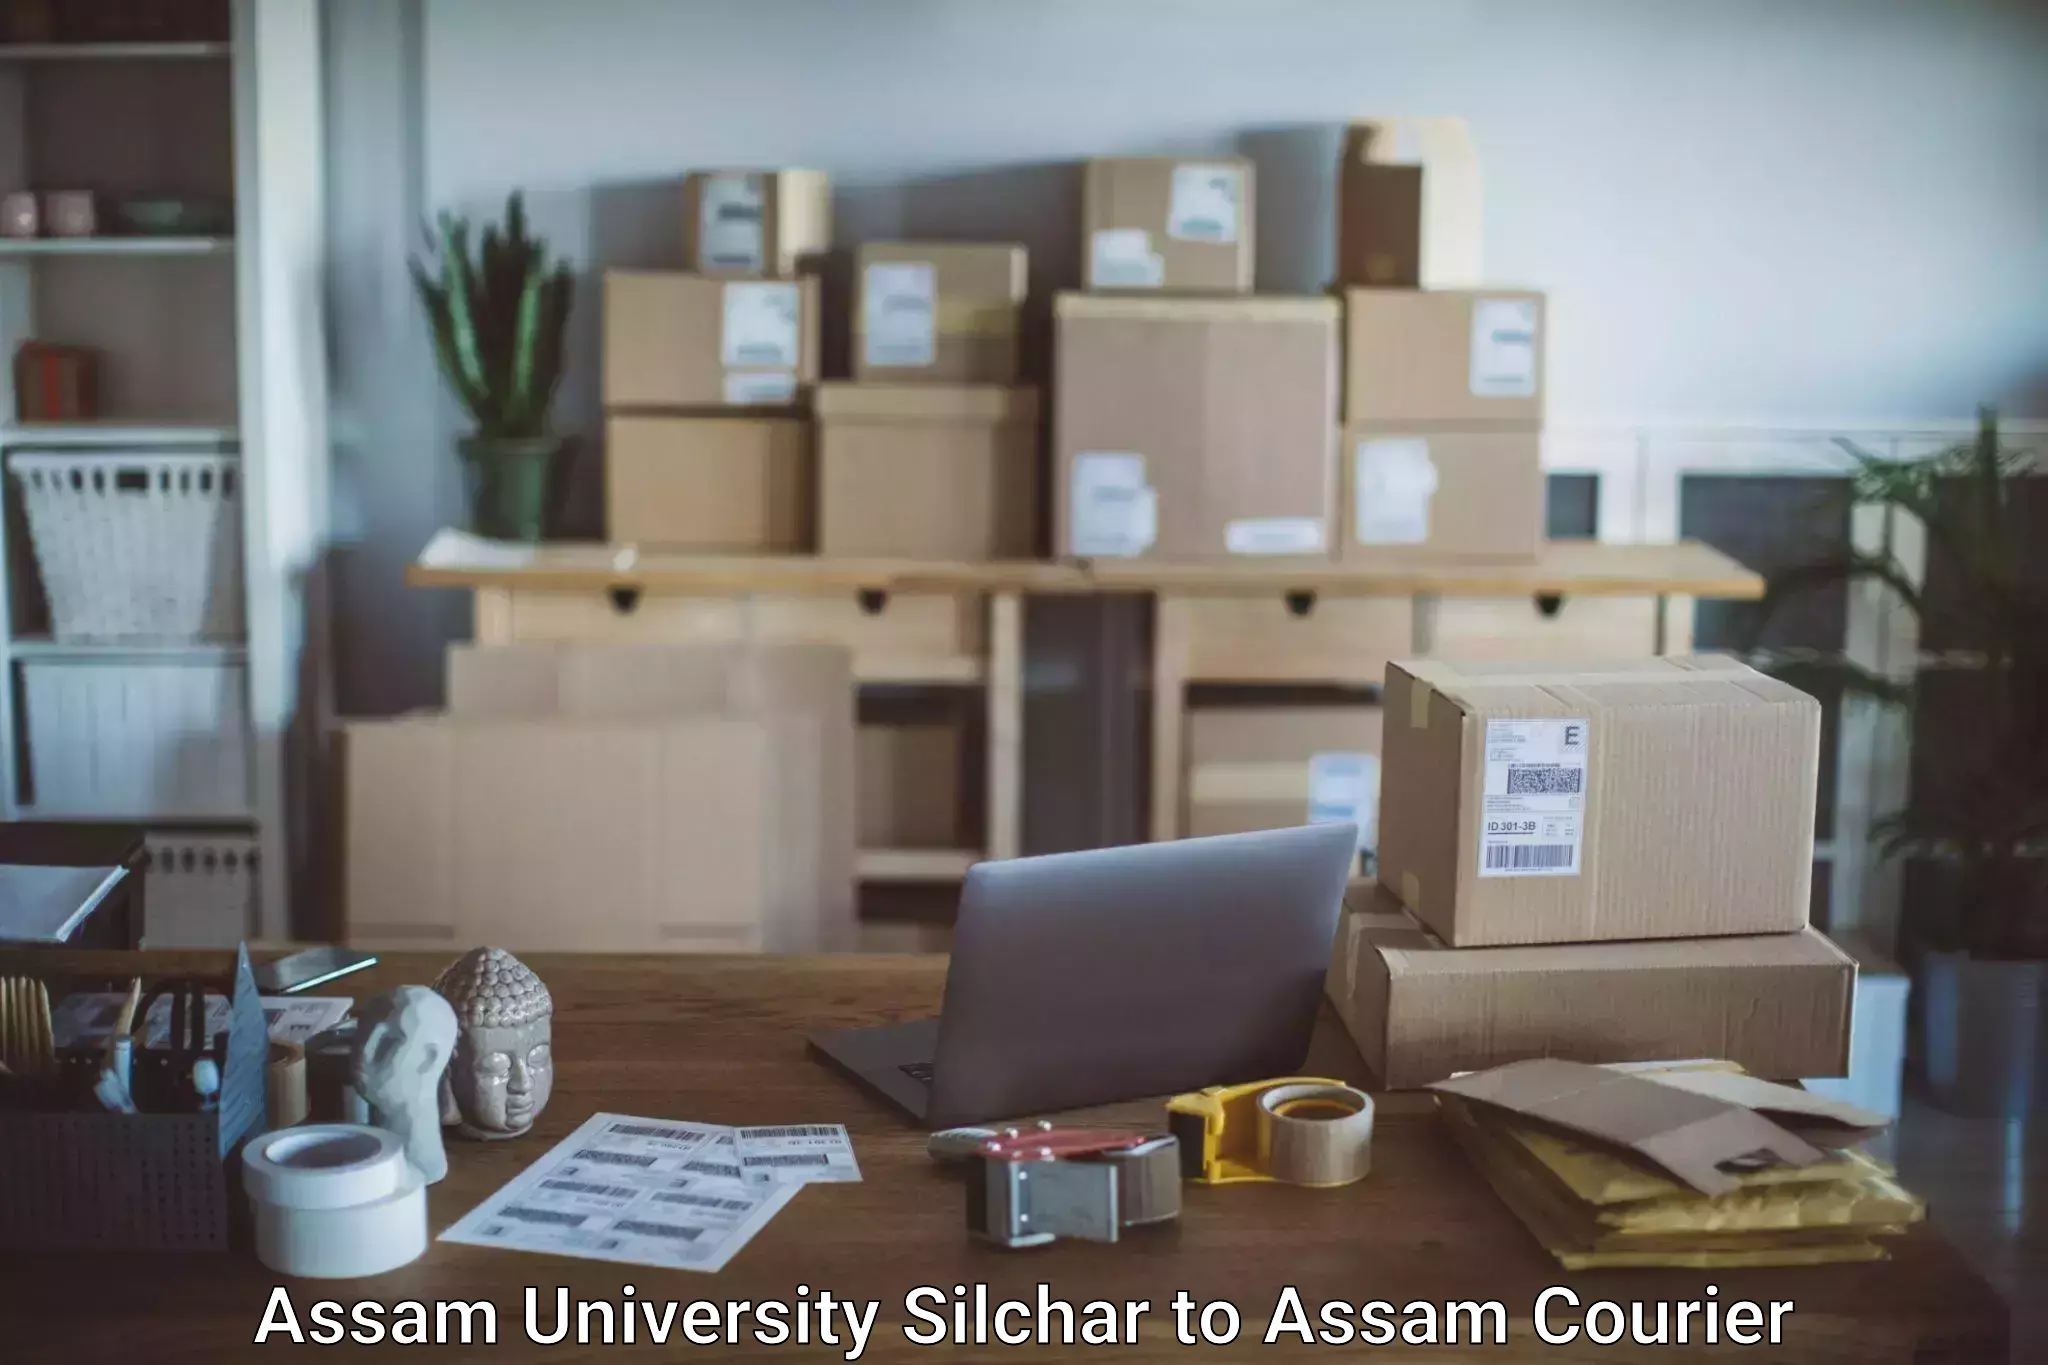 Same day luggage service Assam University Silchar to Silapathar